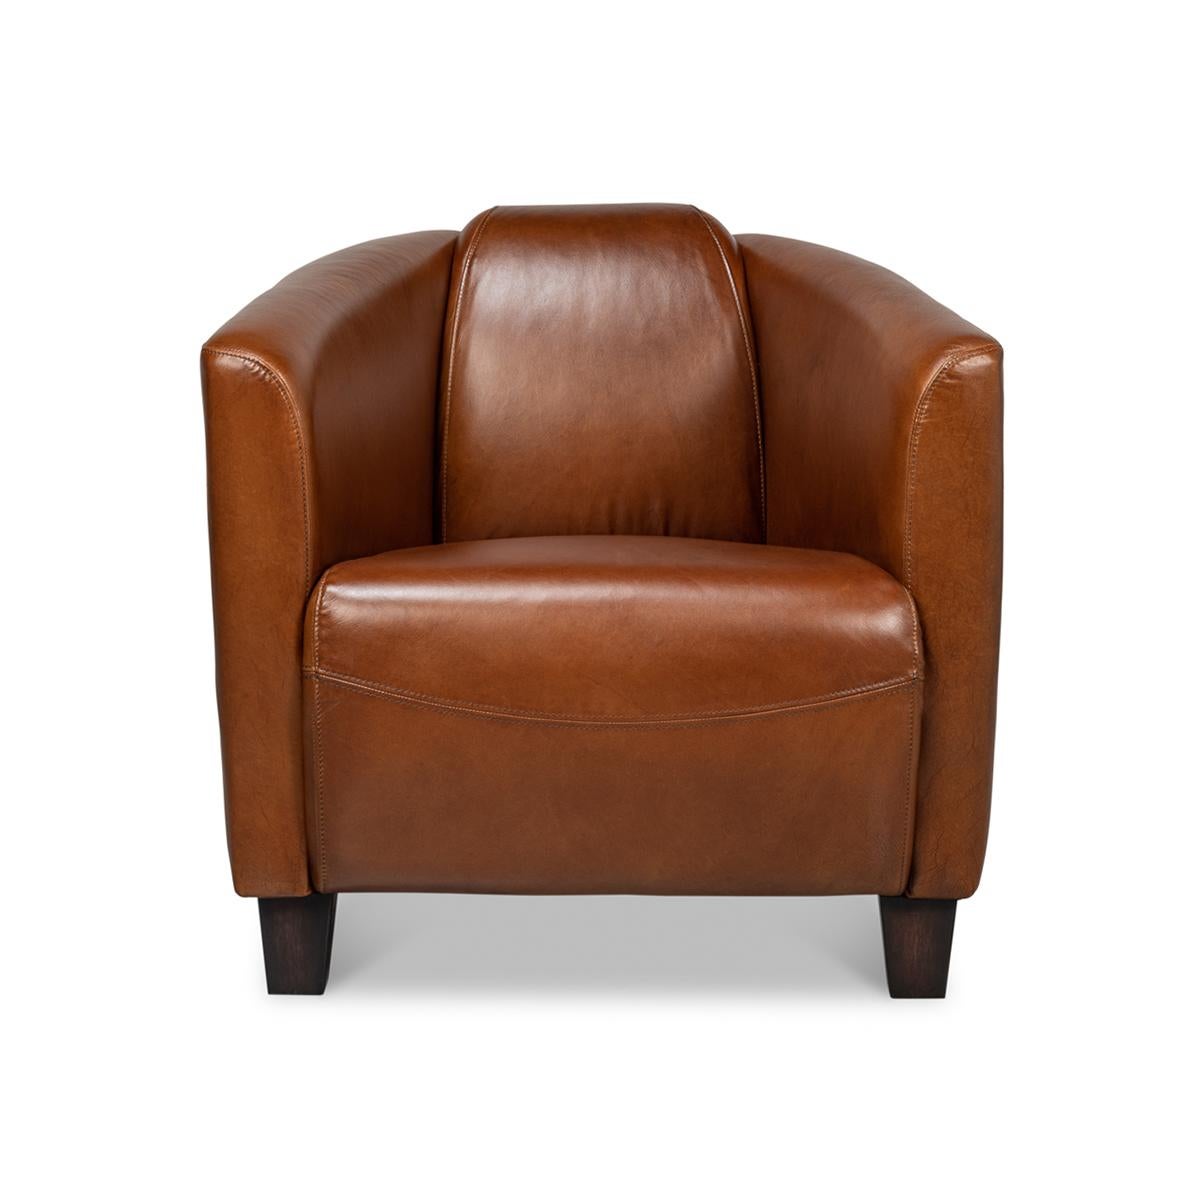 Vintage-style brown leather club chair. Crafted of luxurious top grain leather in warm brown color, this stylish and comfortable chair is perfect for your den, library, or living room.

Color variation is common and acceptable on vintage leather.